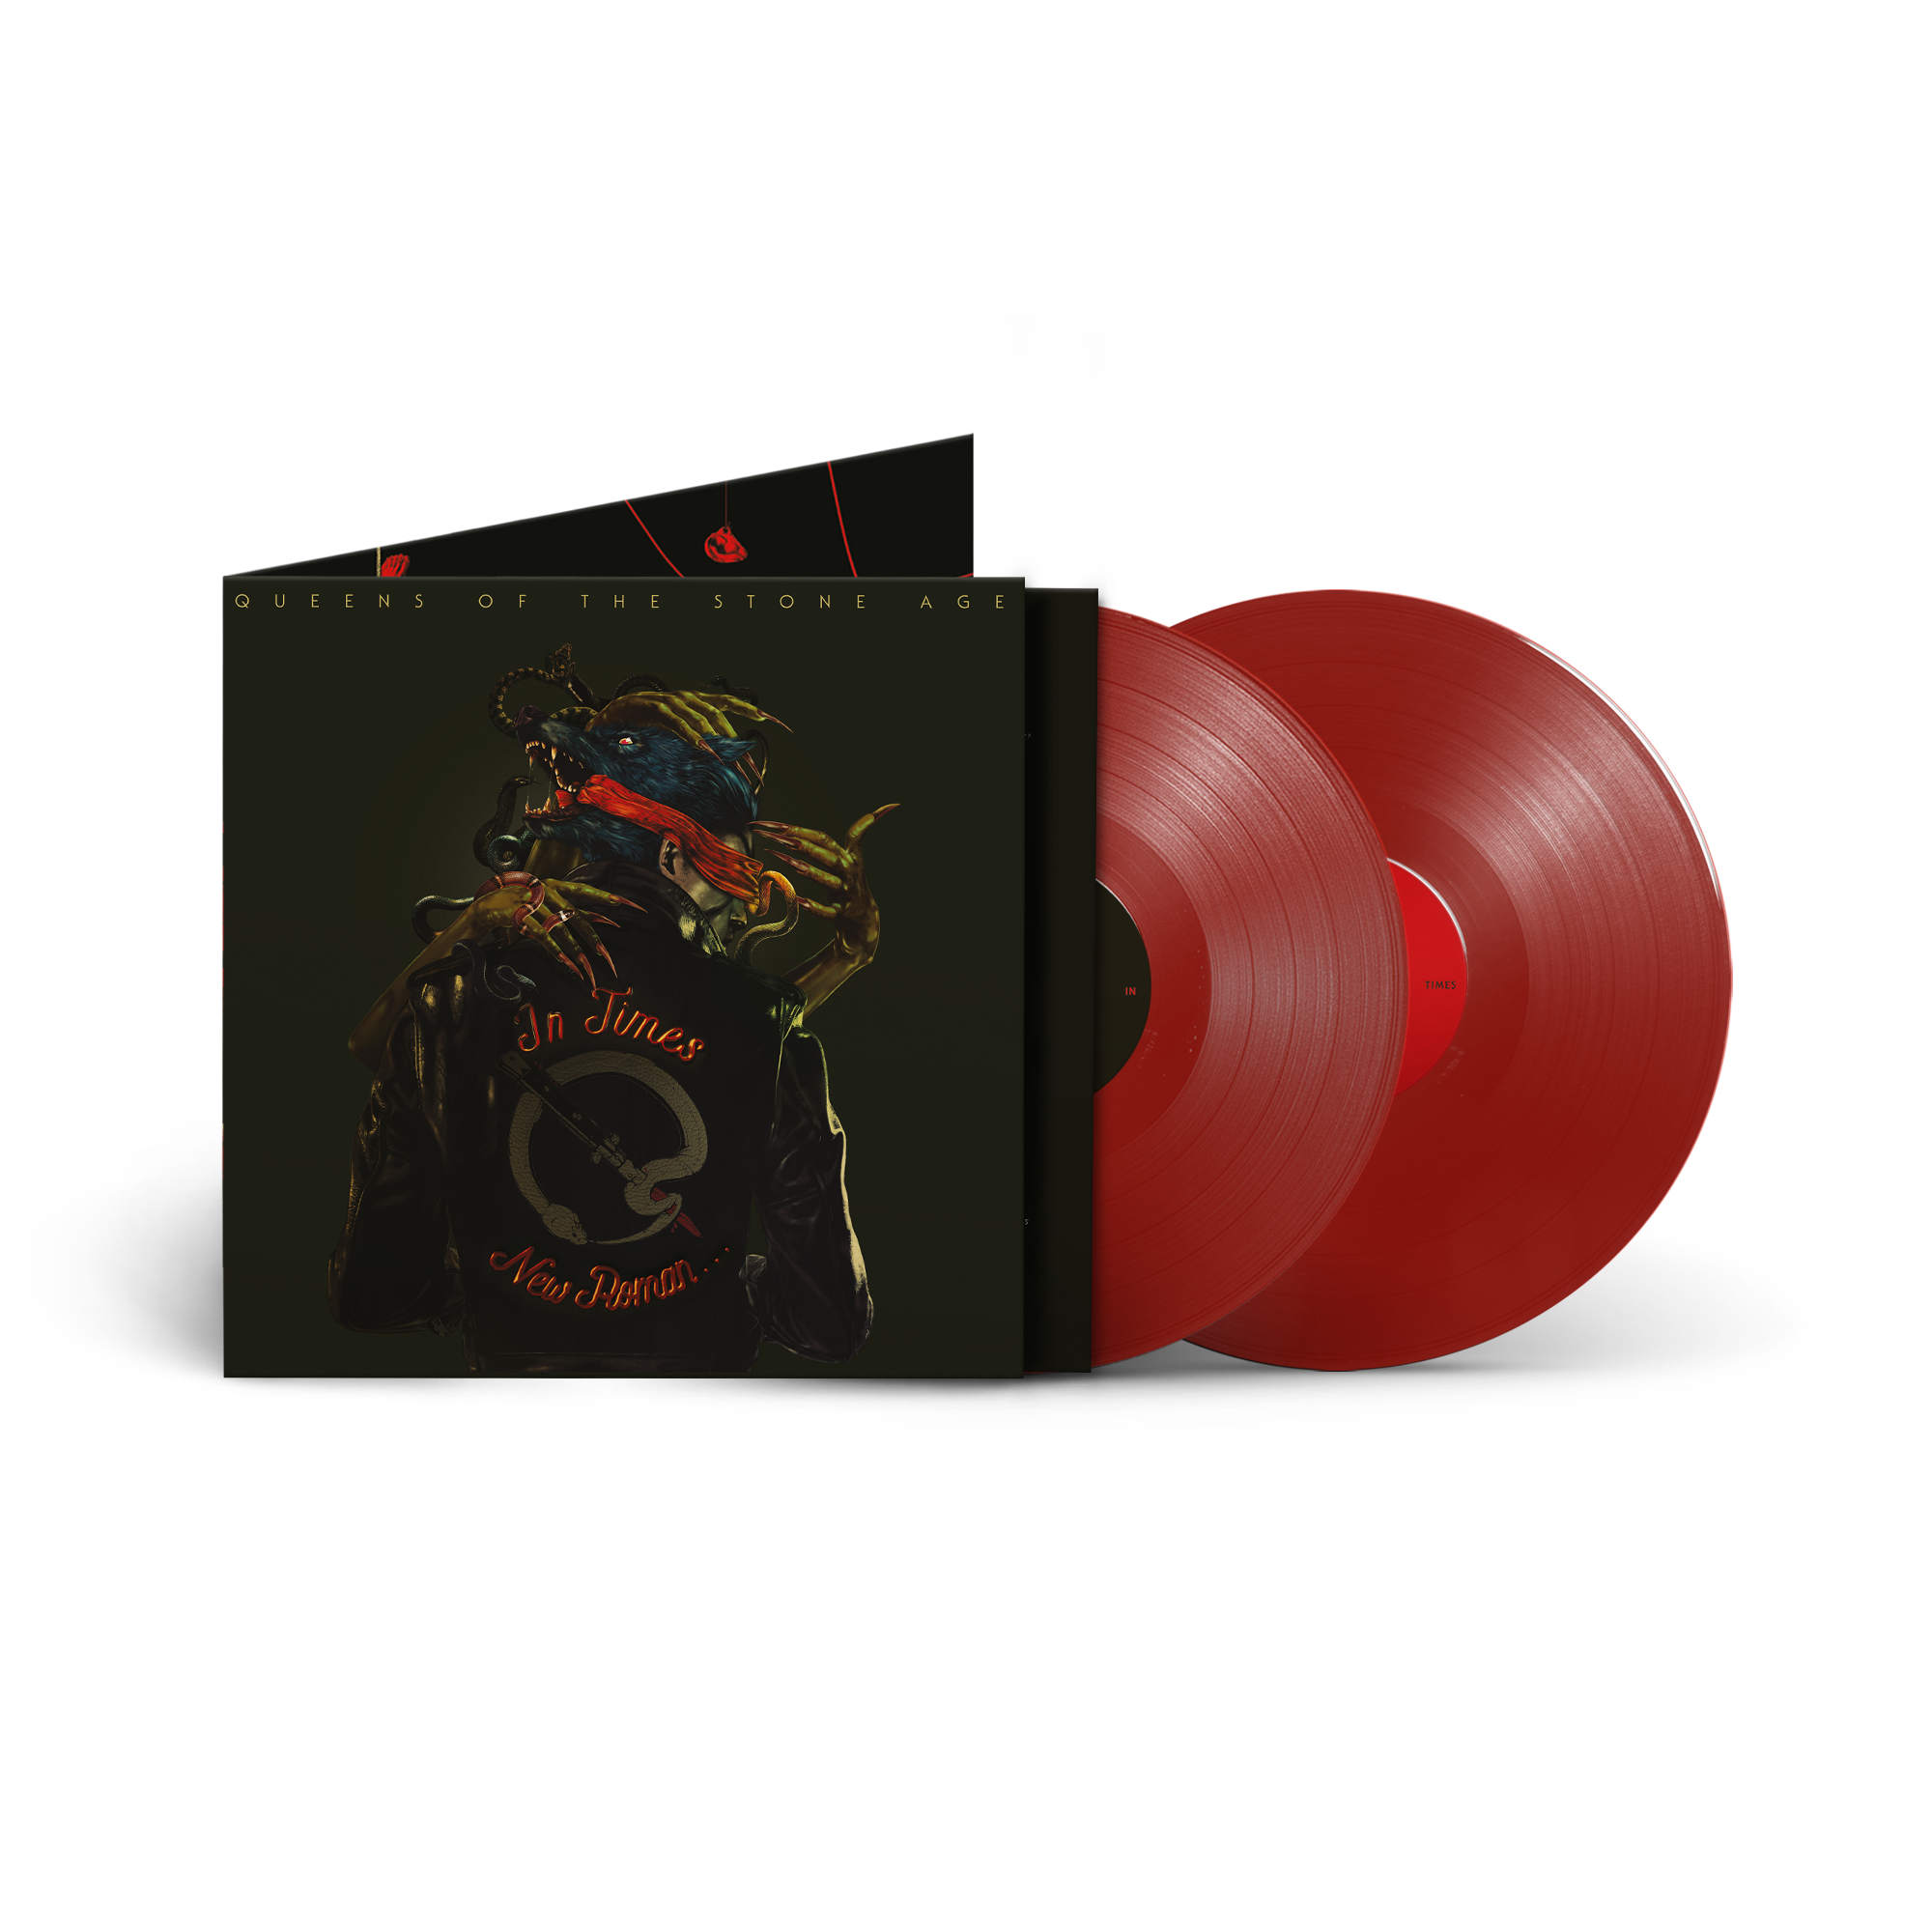 In Times New Roman... Opaque Red 2lp + Slipmat